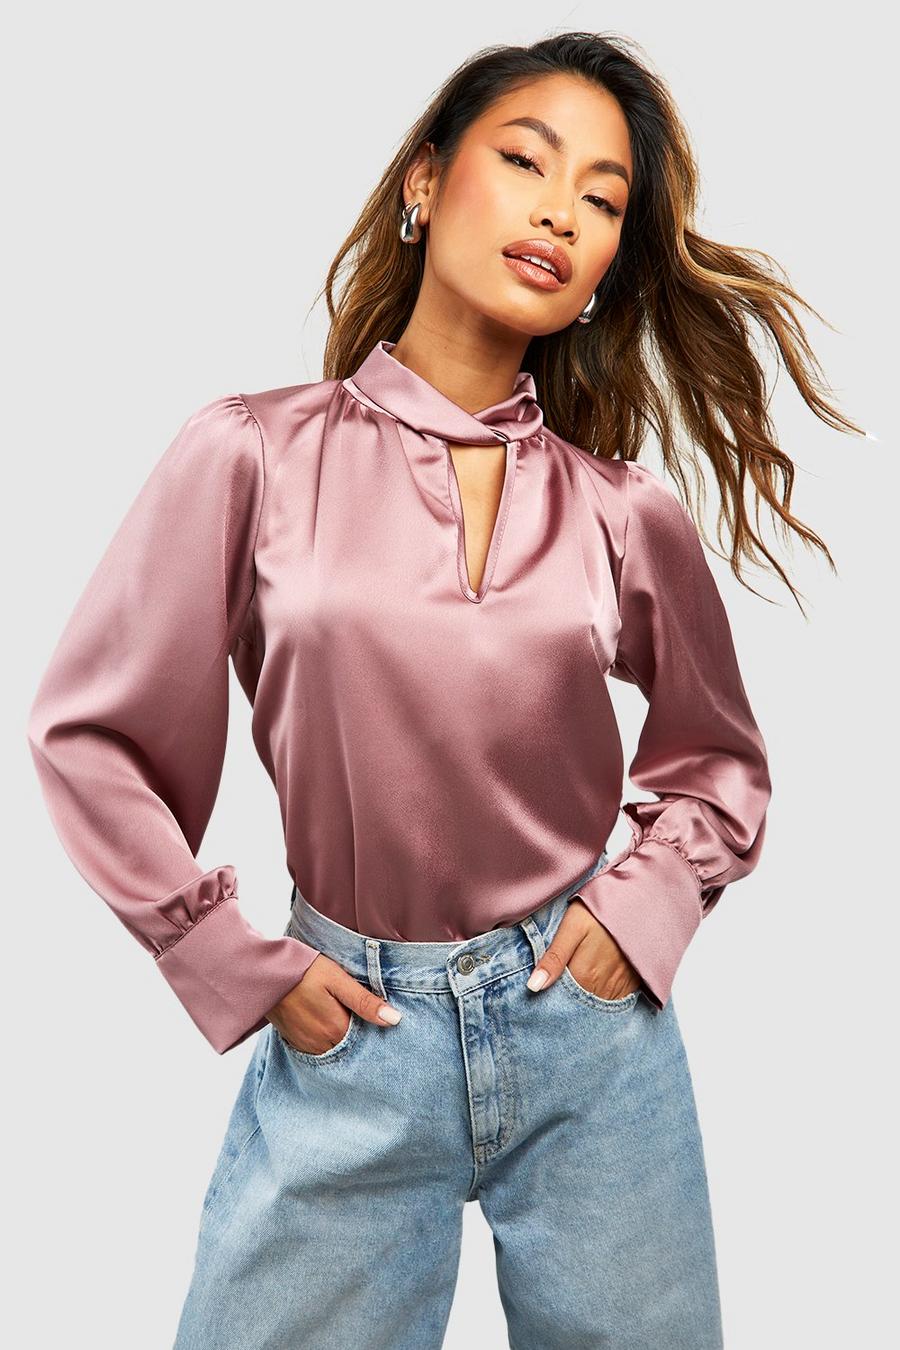 What is Women Modest Clothing Girls Clothes Party Satin Longsleeve